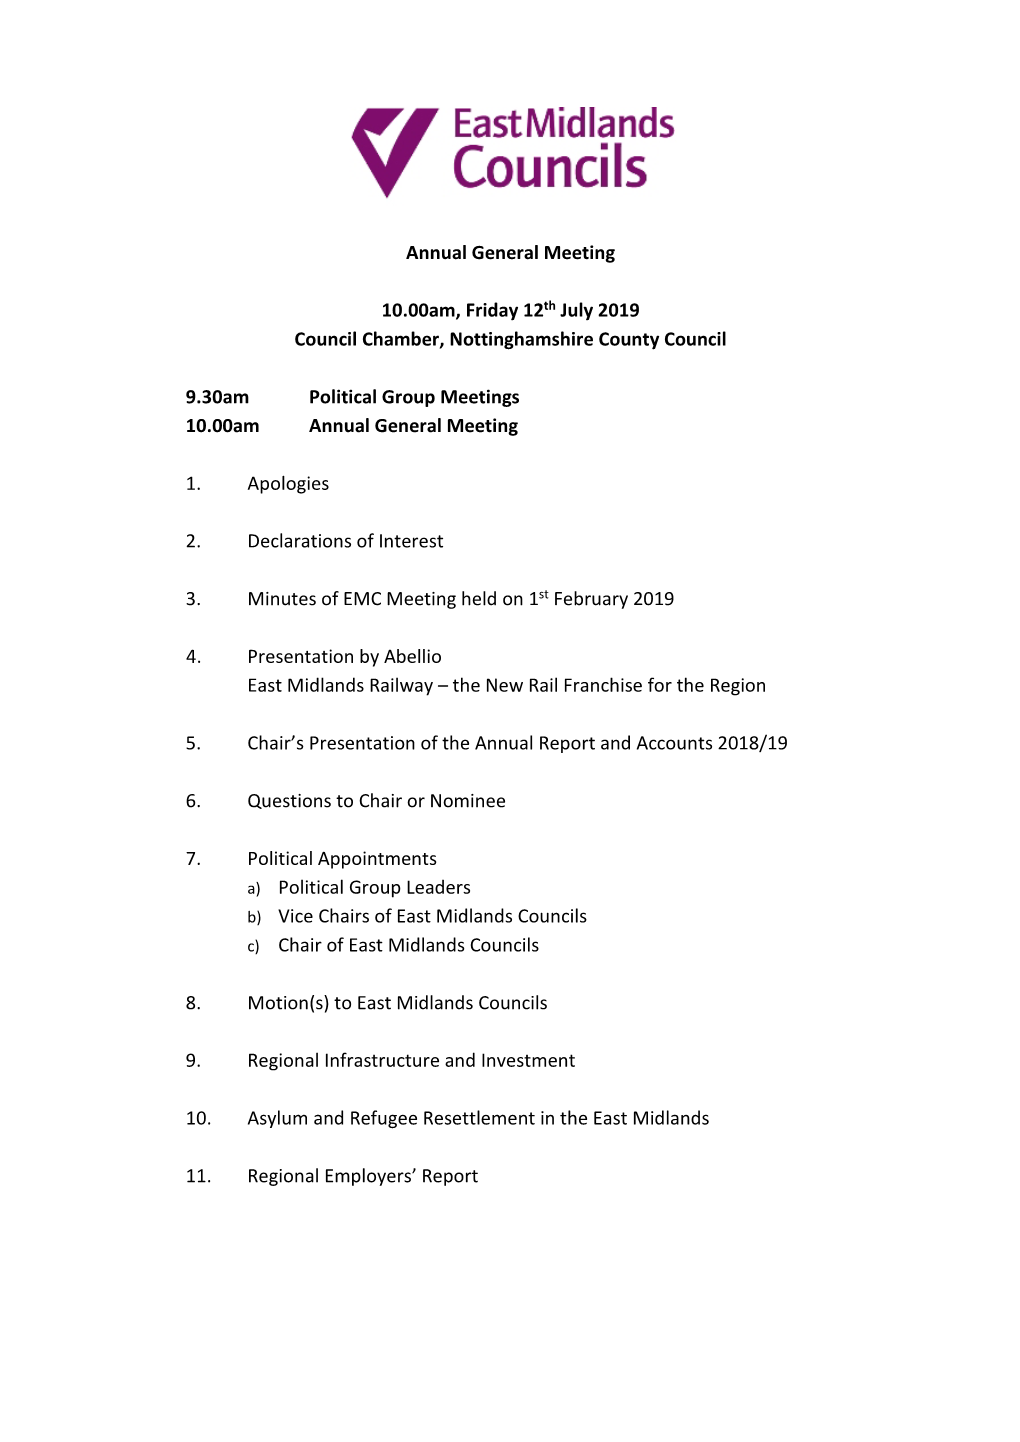 EMC AGM Meeting Papers 12 July 2019